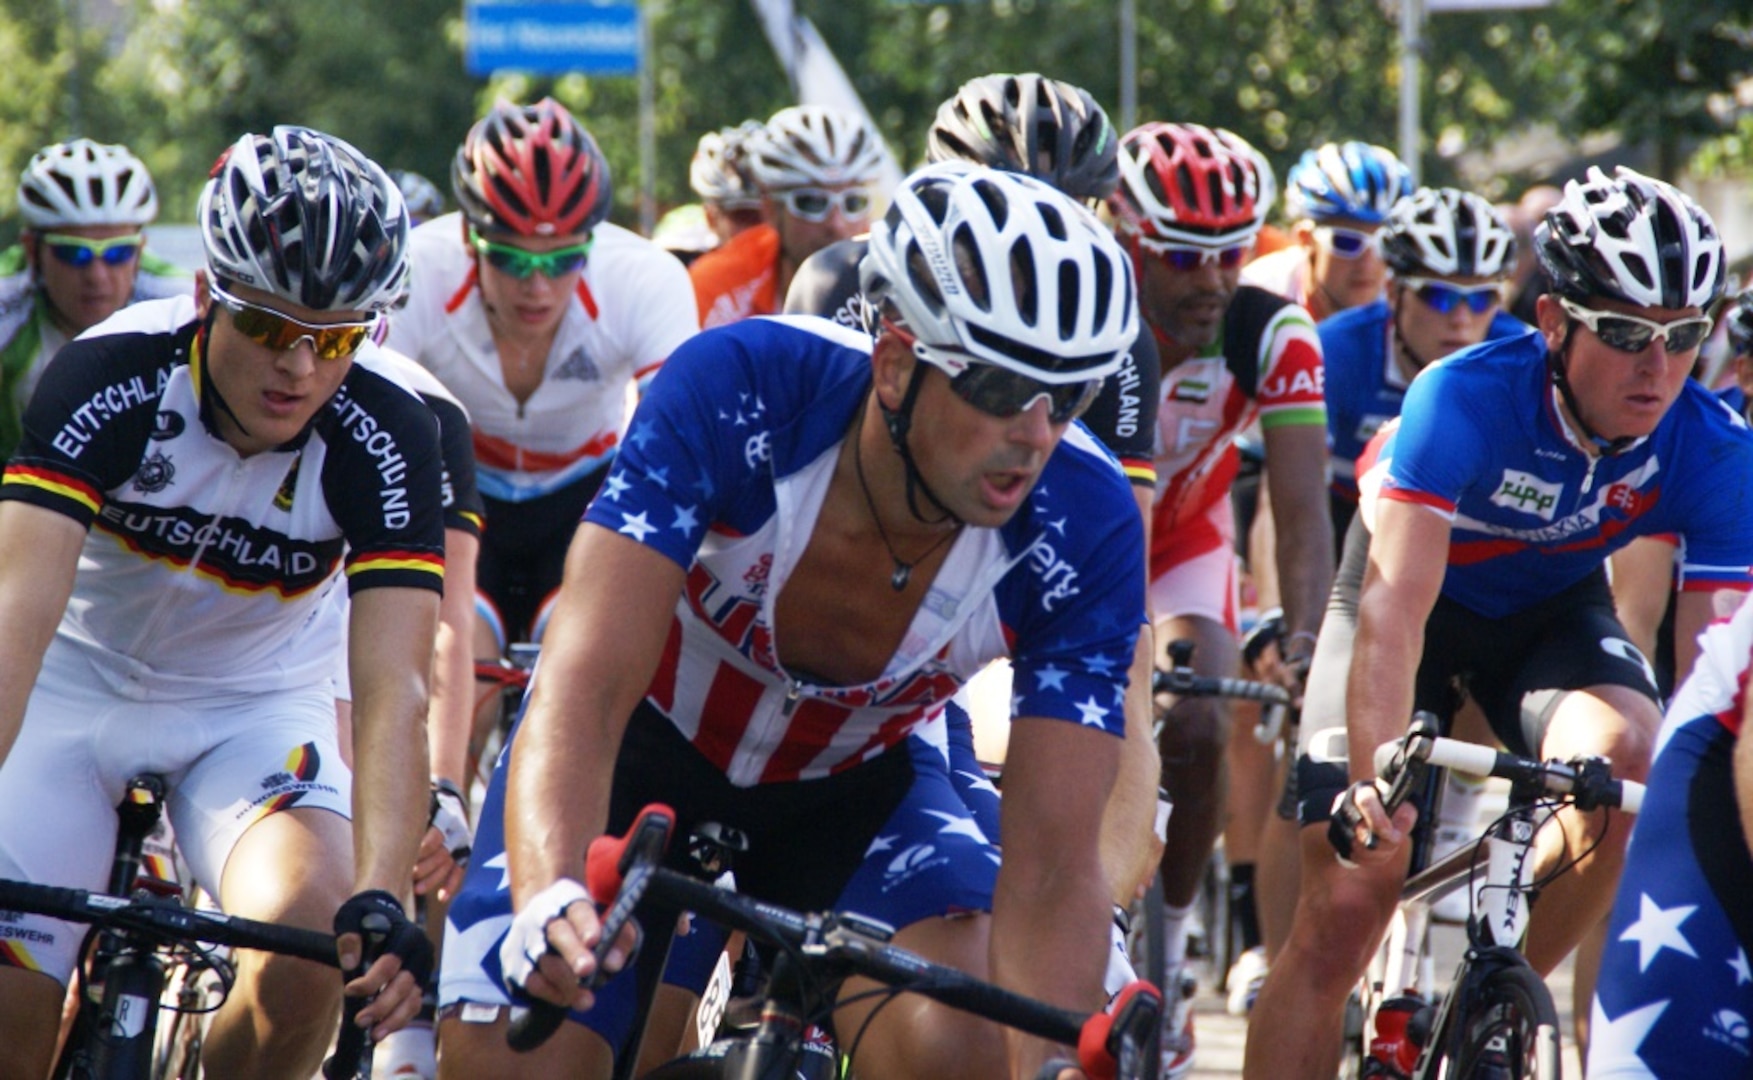 MSgt Andy Chocha (Air Force) – men’s road, competing in the 2013 CISM World Military Cycling Championship 2-6 September in Leopoldsburg, Belgium.  